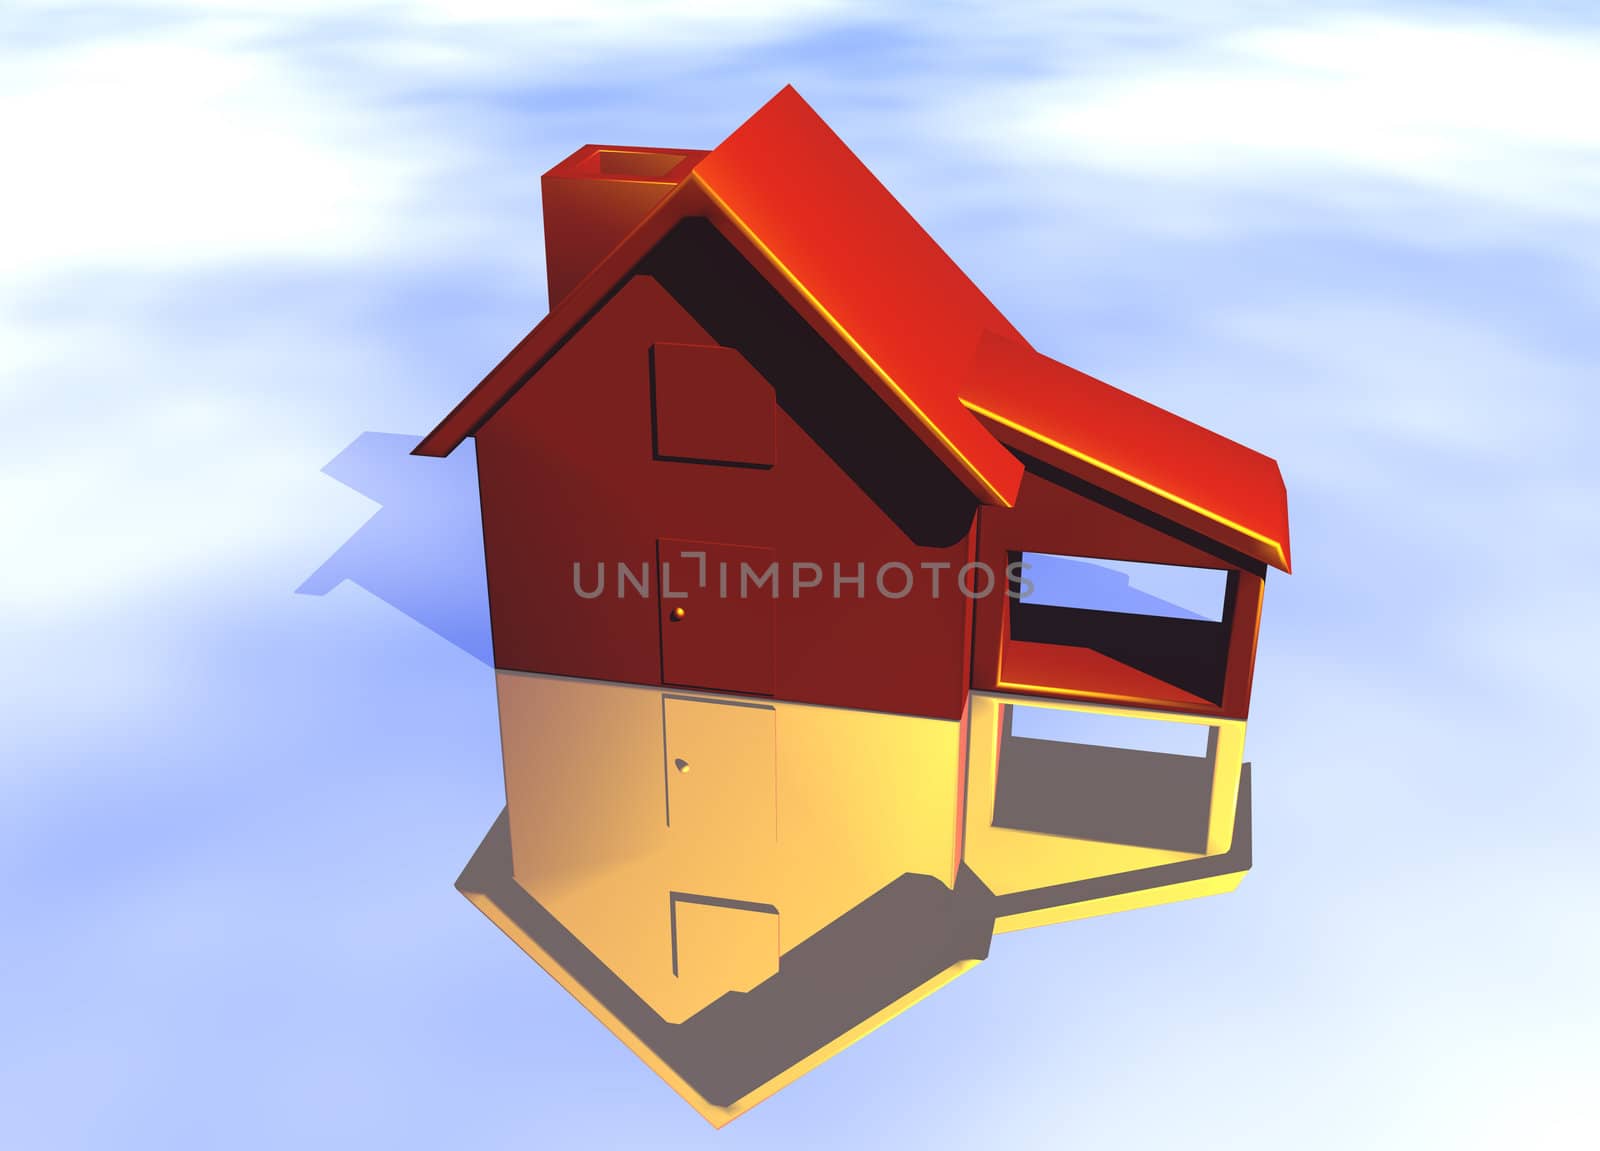 Red House Model on Blue-Sky Background with Reflection Concept Risk or Danger